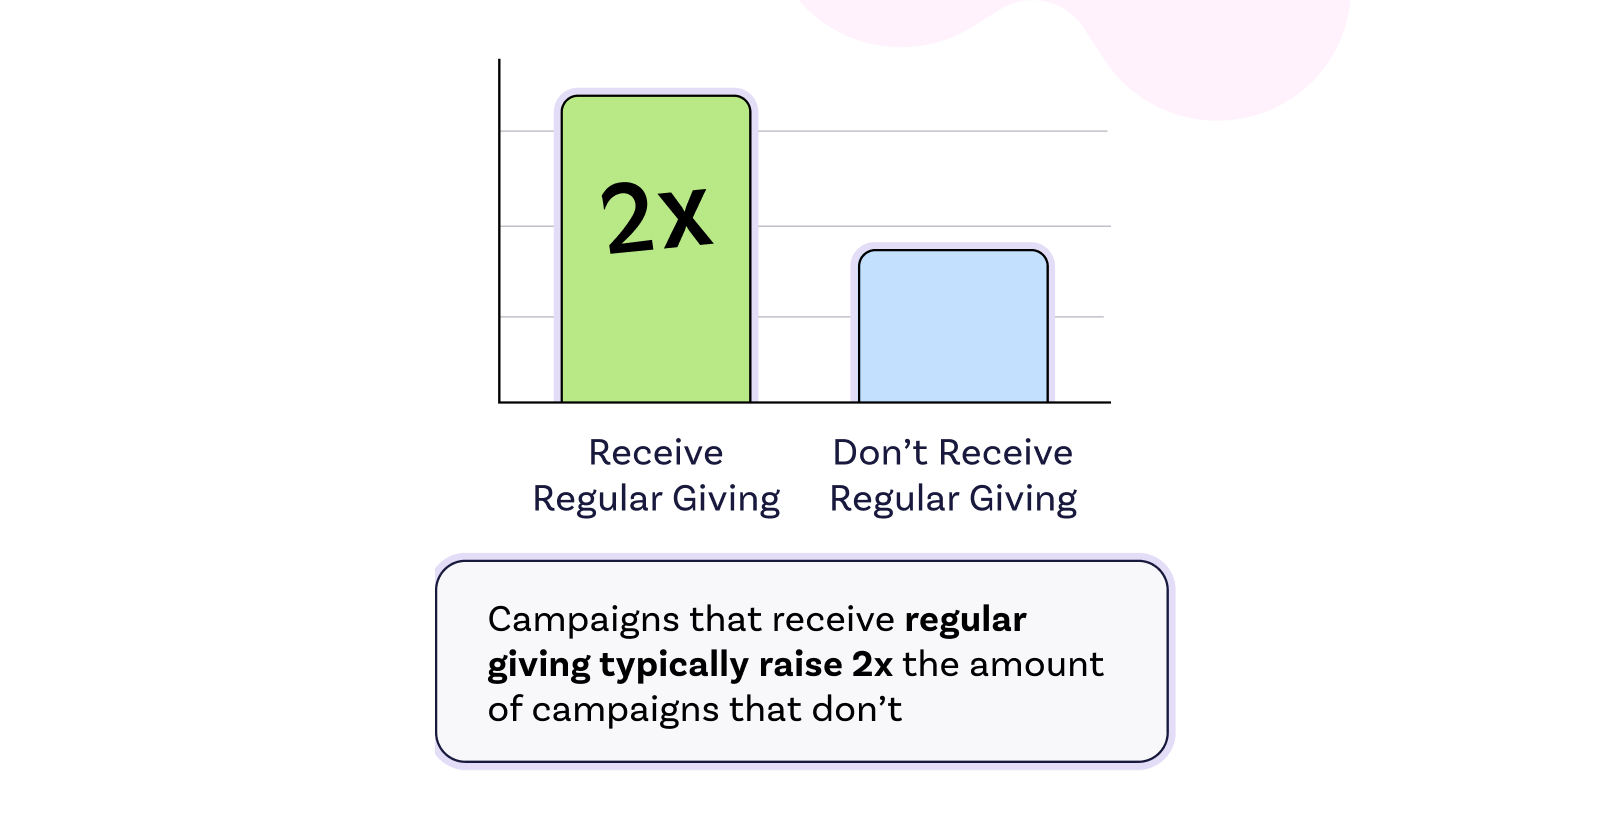 Campaigns that receive regular giving typically raise 2x the amount of campaigns that don’t. 